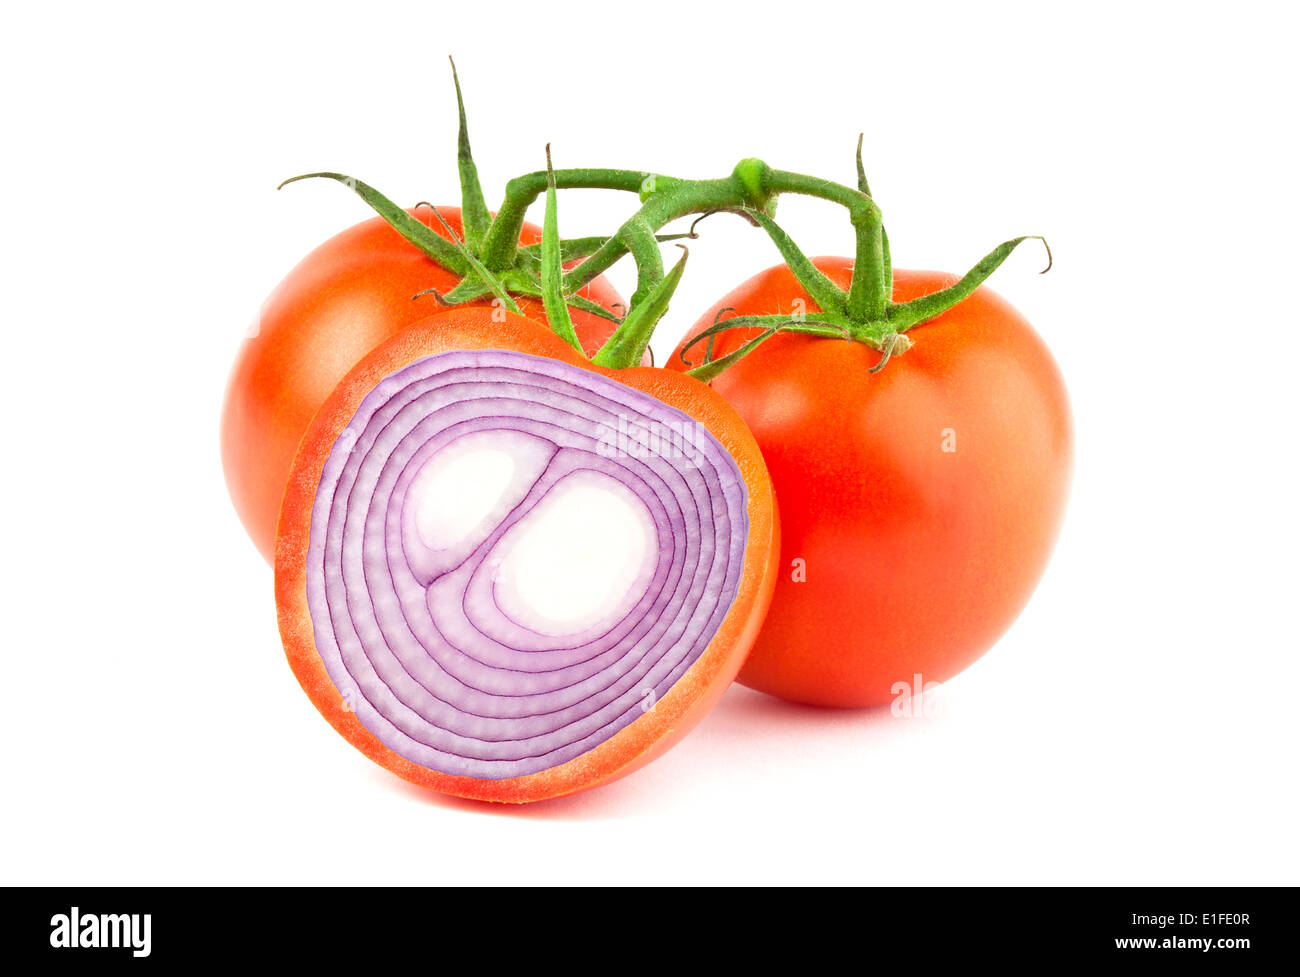 Manipulated image of sliced tomato with red onion inside Stock Photo